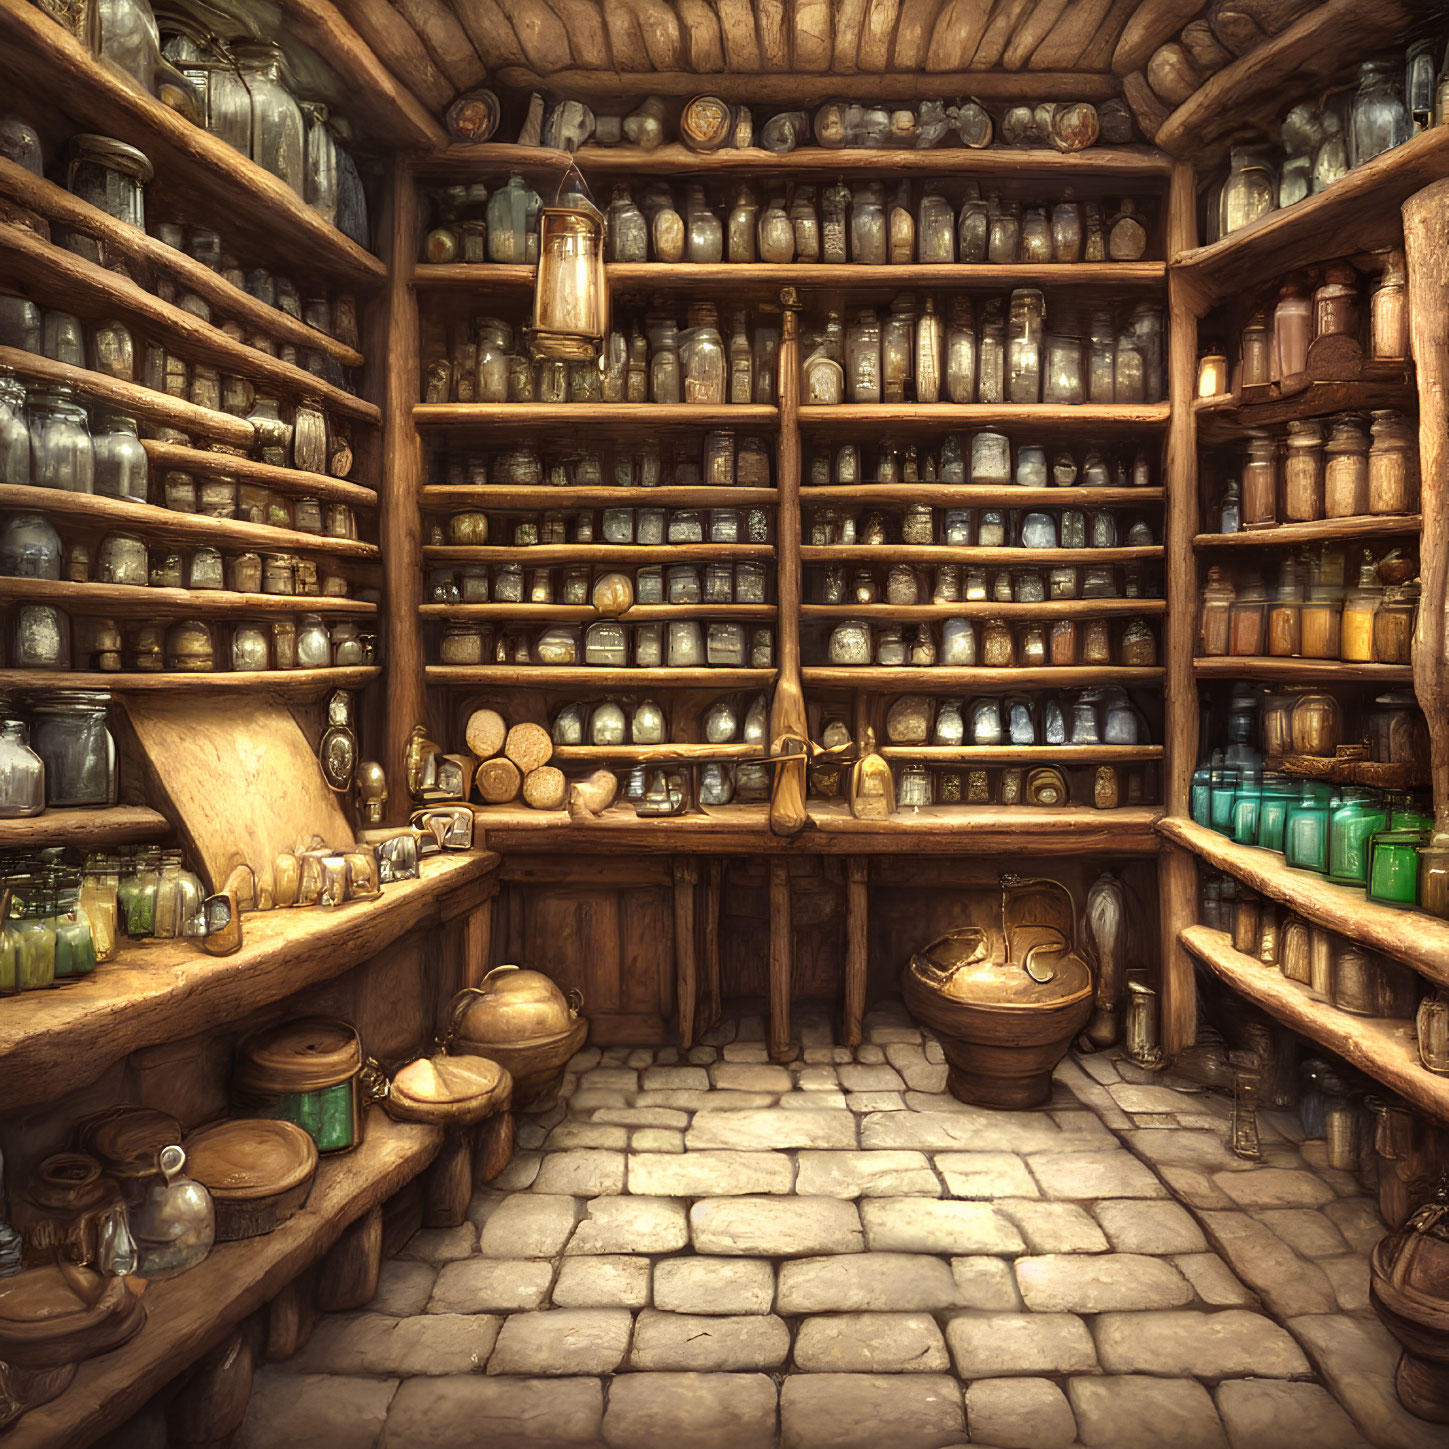 Vintage Apothecary with Wooden Shelves and Stone Floor